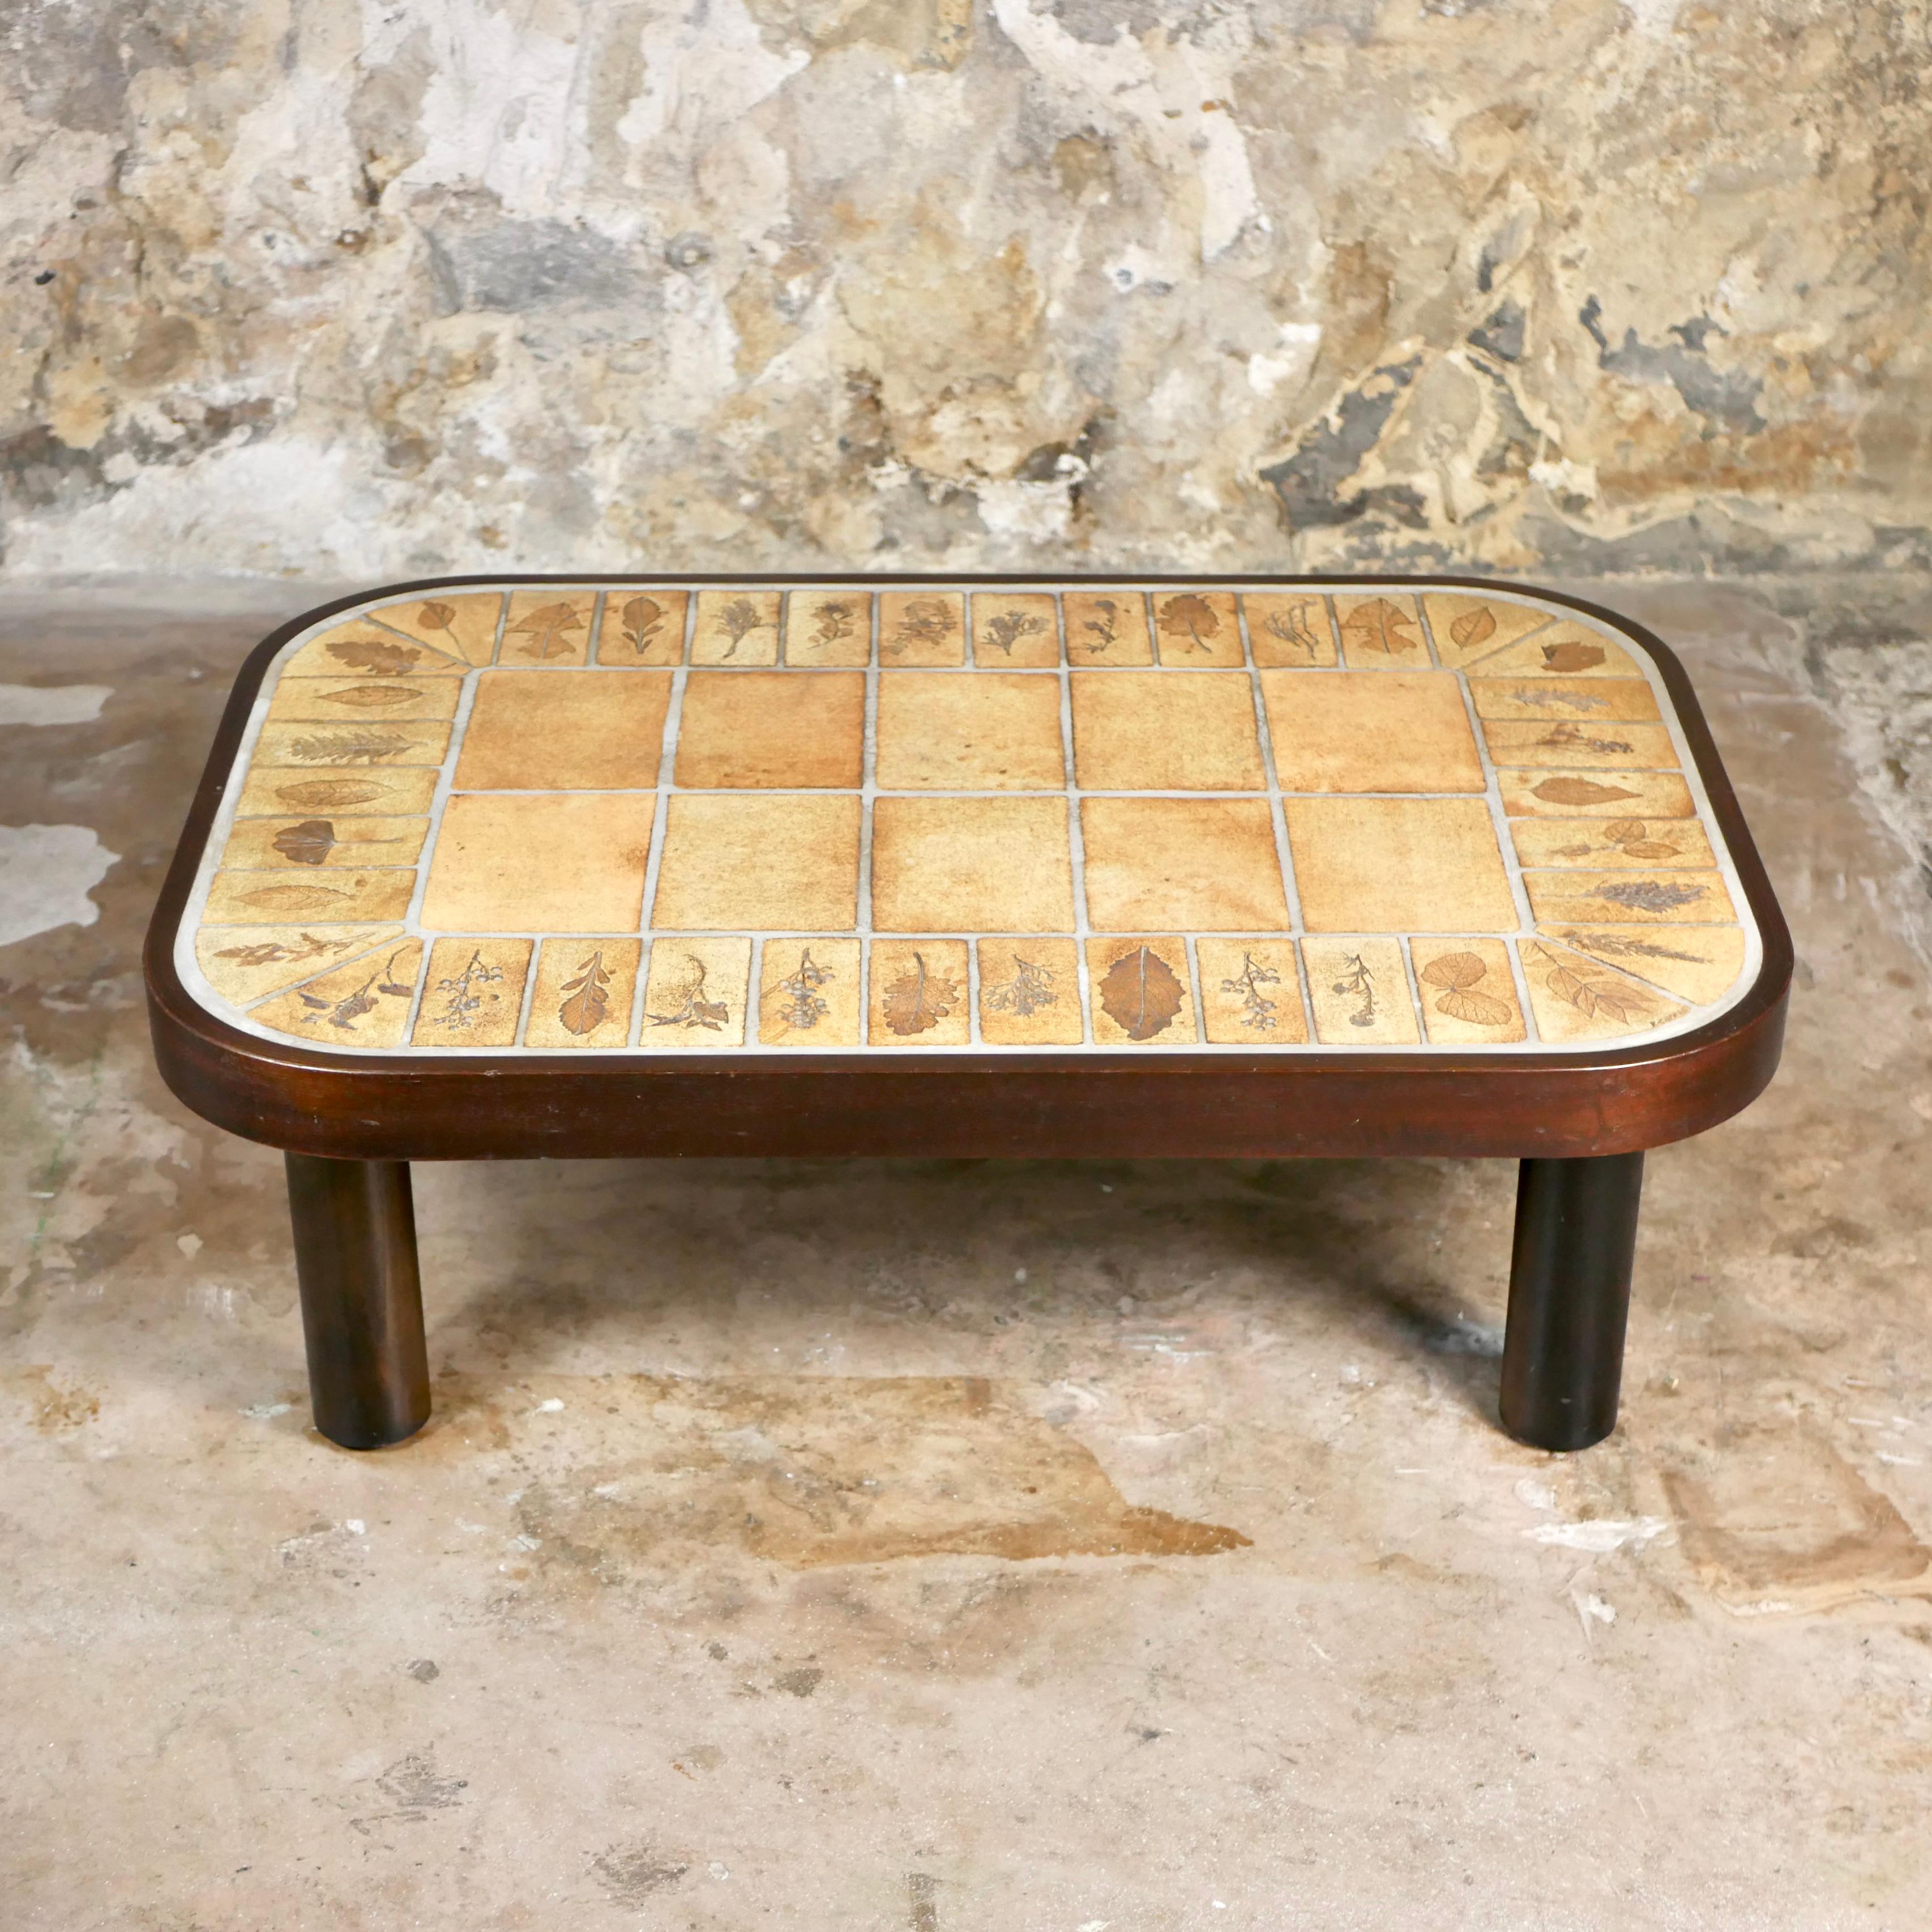 Ceramic and wood coffee table, made by Roger Capron in the end of the 1960s.
It is part of the 